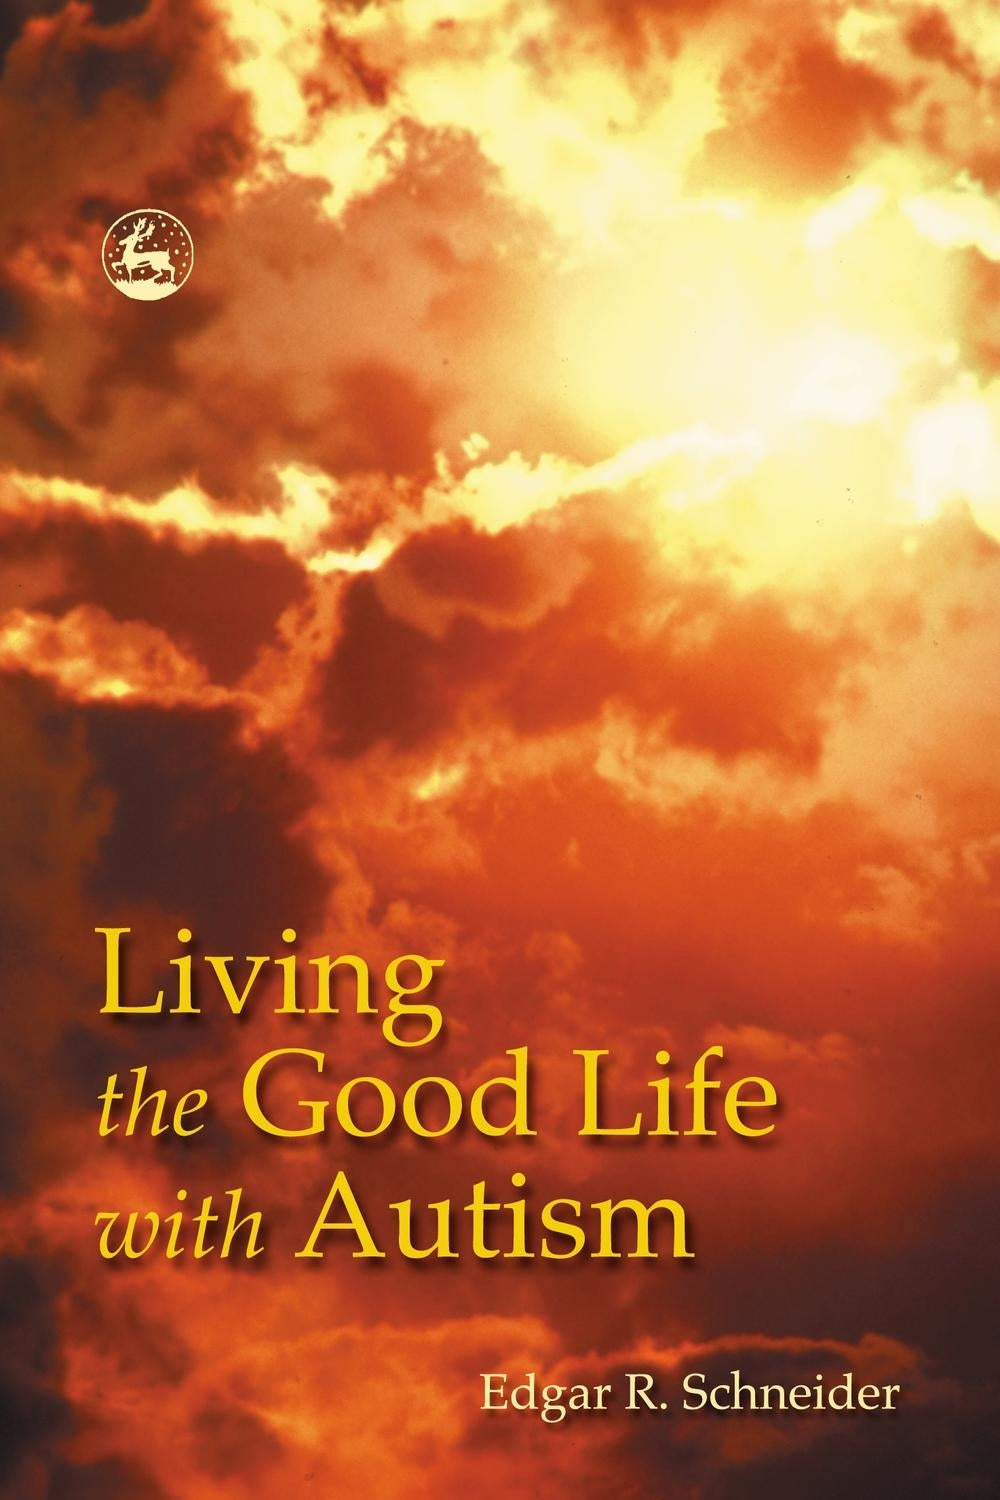 Living the Good Life with Autism by Edgar Schneider